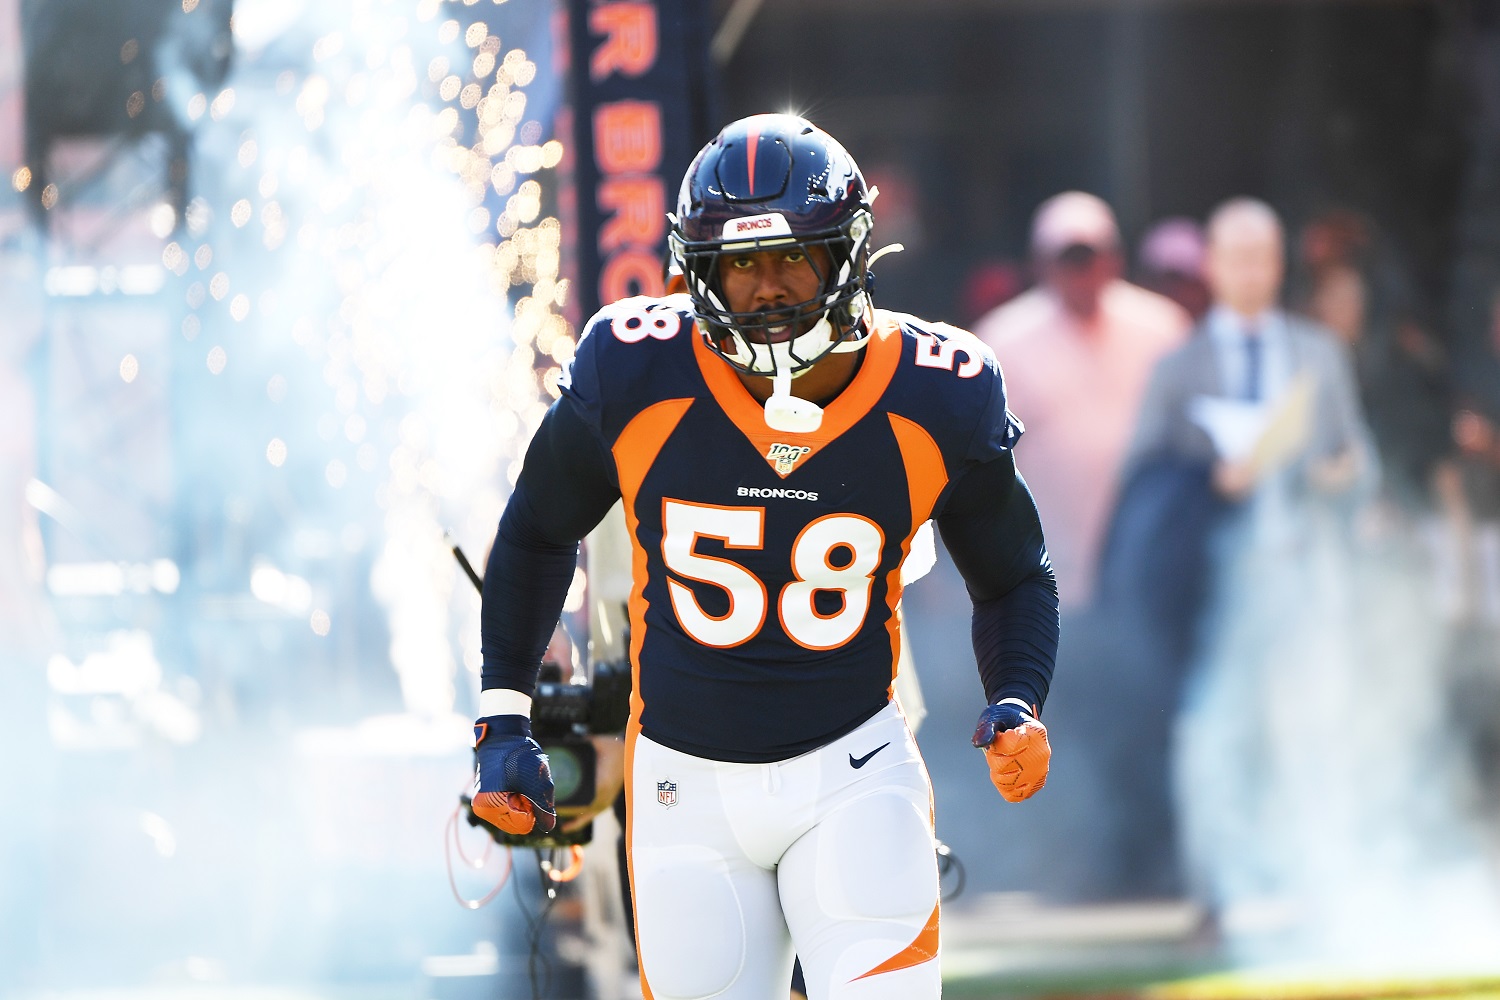 Denver Broncos linebacker Von Miller takes the field for a game against the Tennessee Titans at Empower Field at Mile High in Denver on Oct. 13, 2019.